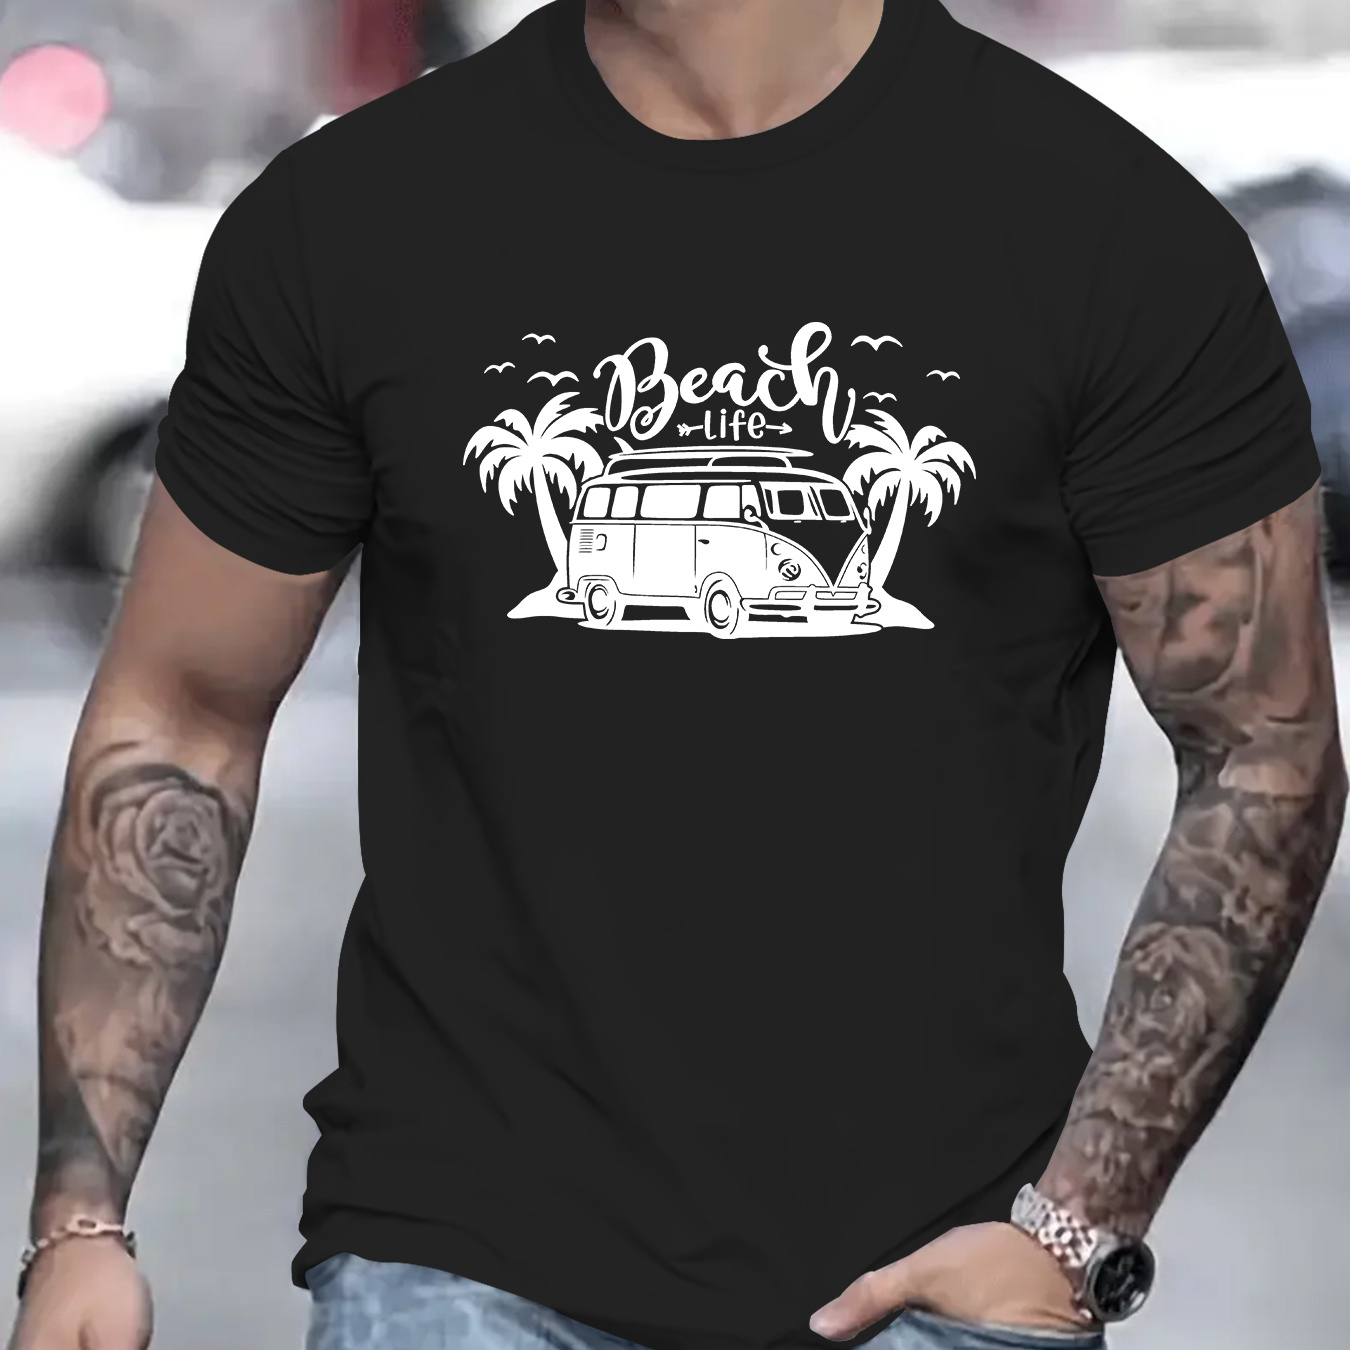 

Men's Casual Short Sleeve, Stylish T-shirt With " Beach"creative Print, Summer Fashion Top, Crew Neck Tee-shirt For Male